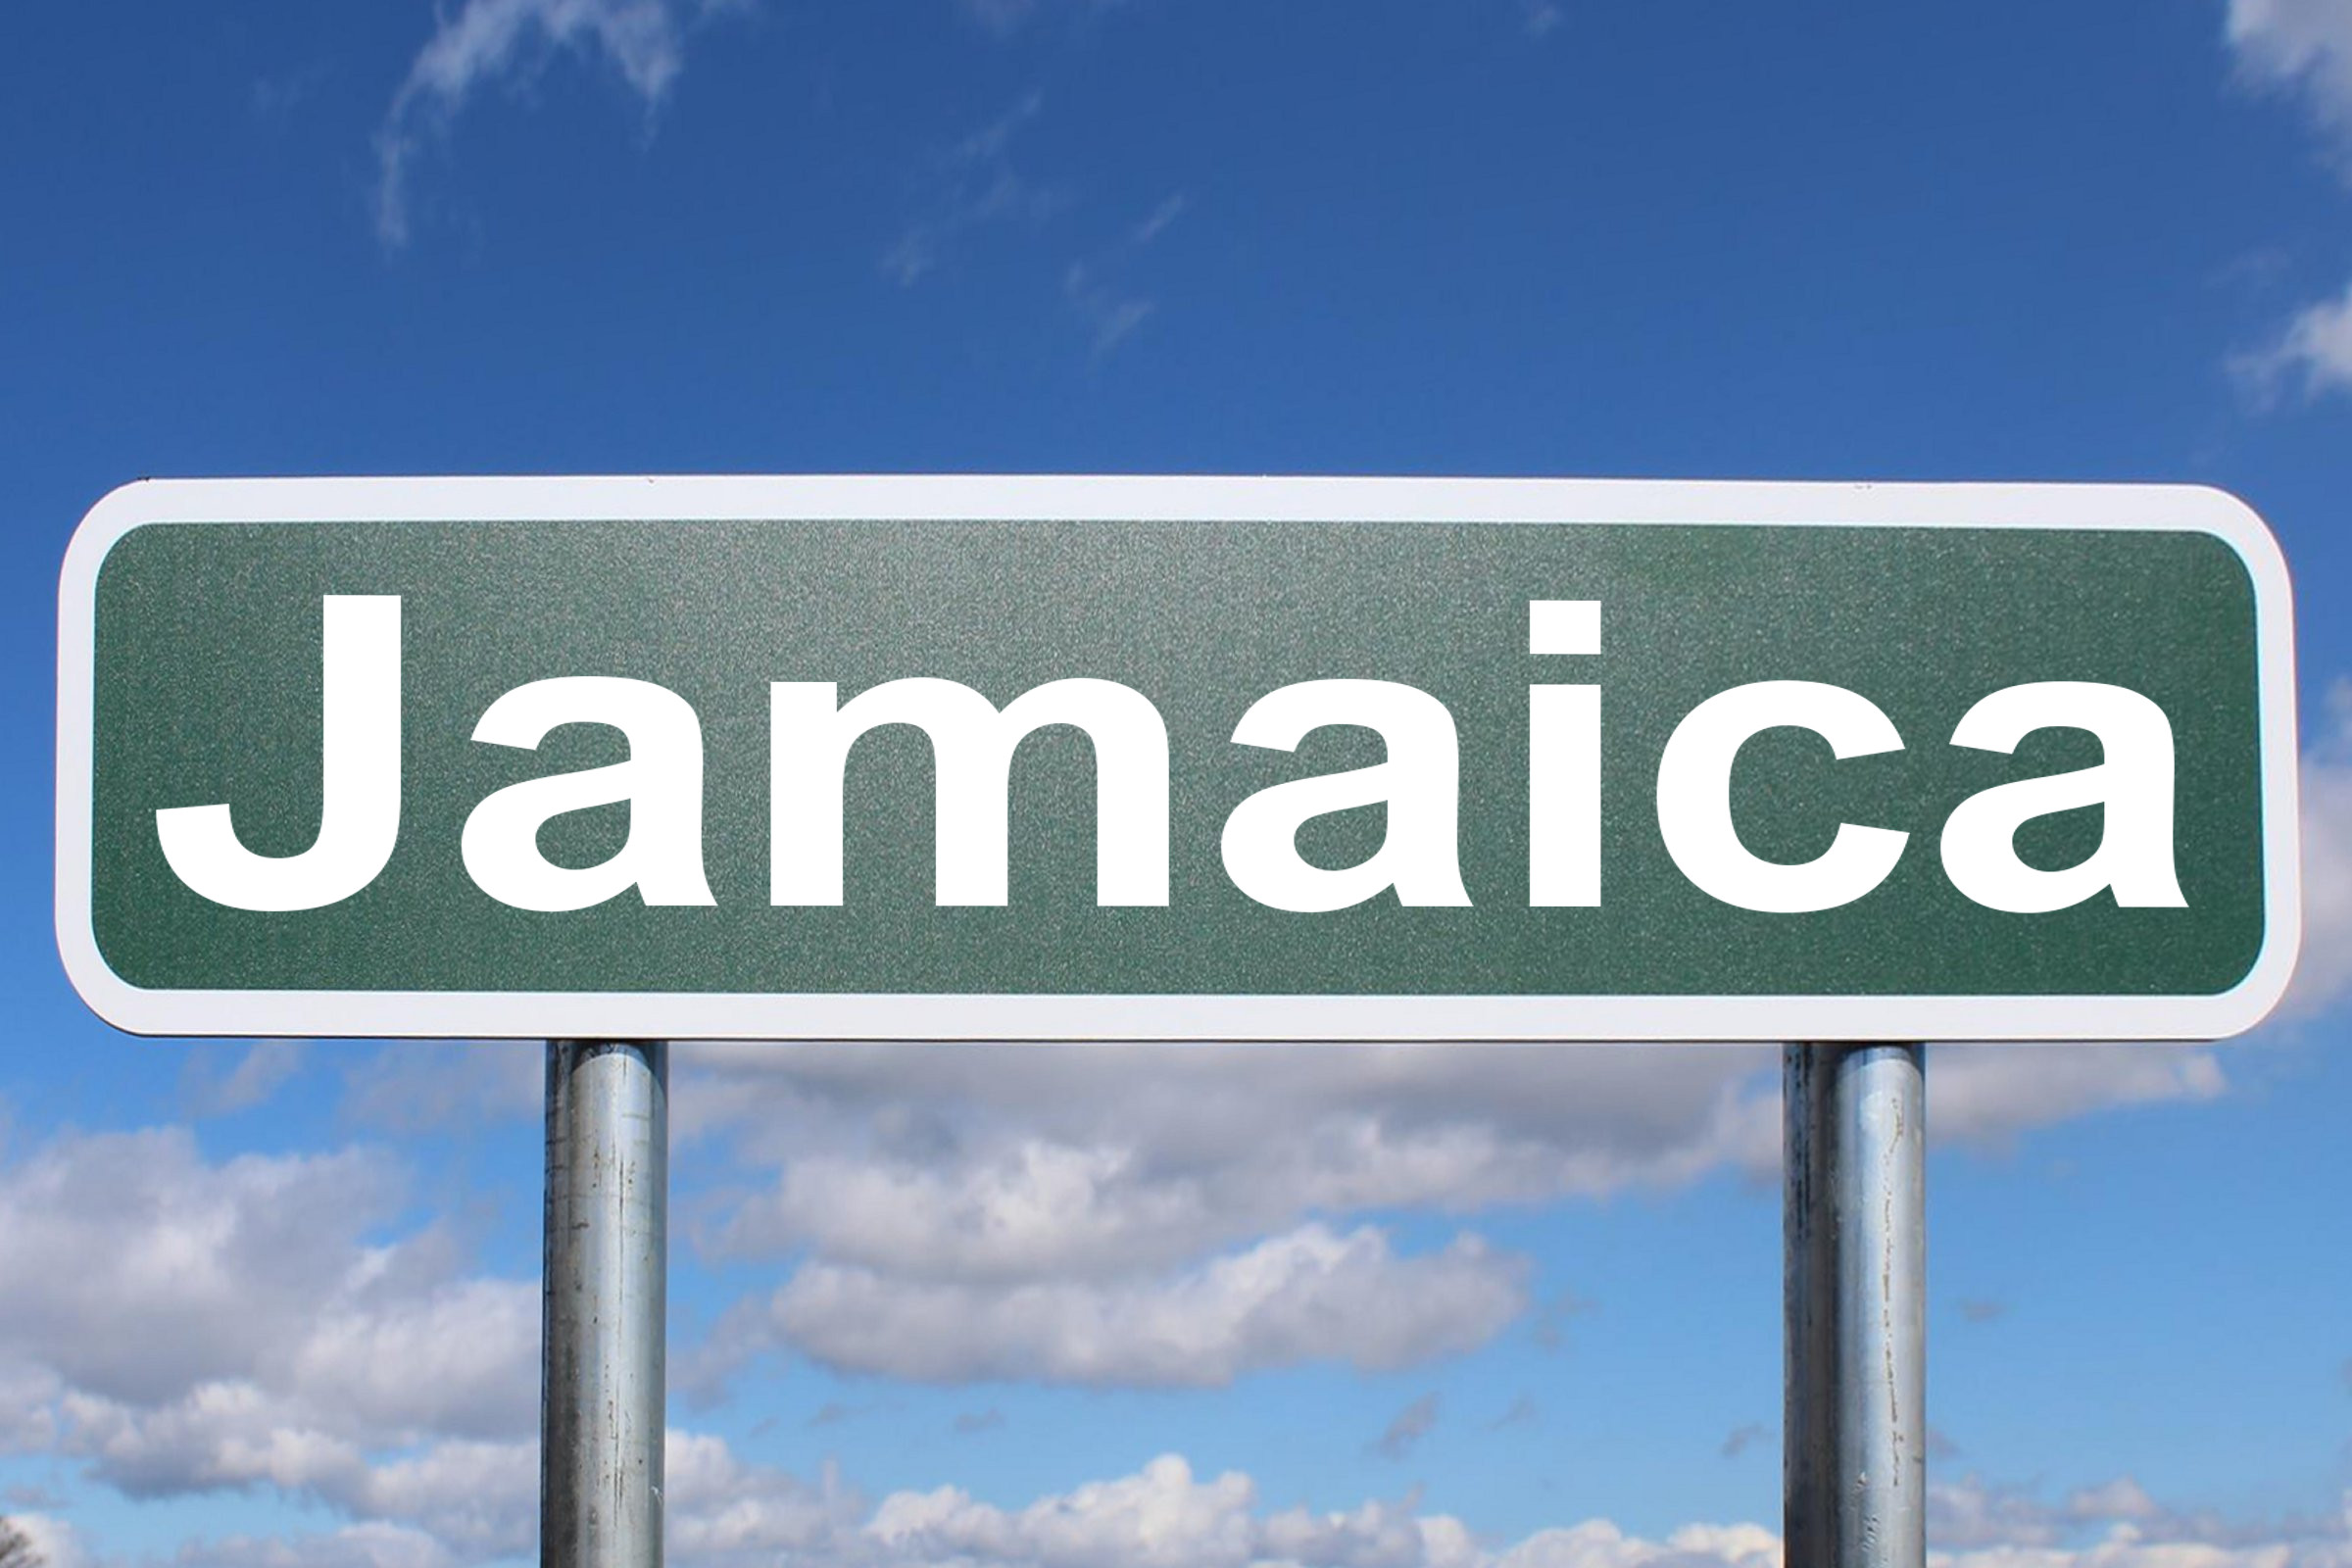 jamaica-free-of-charge-creative-commons-highway-sign-image